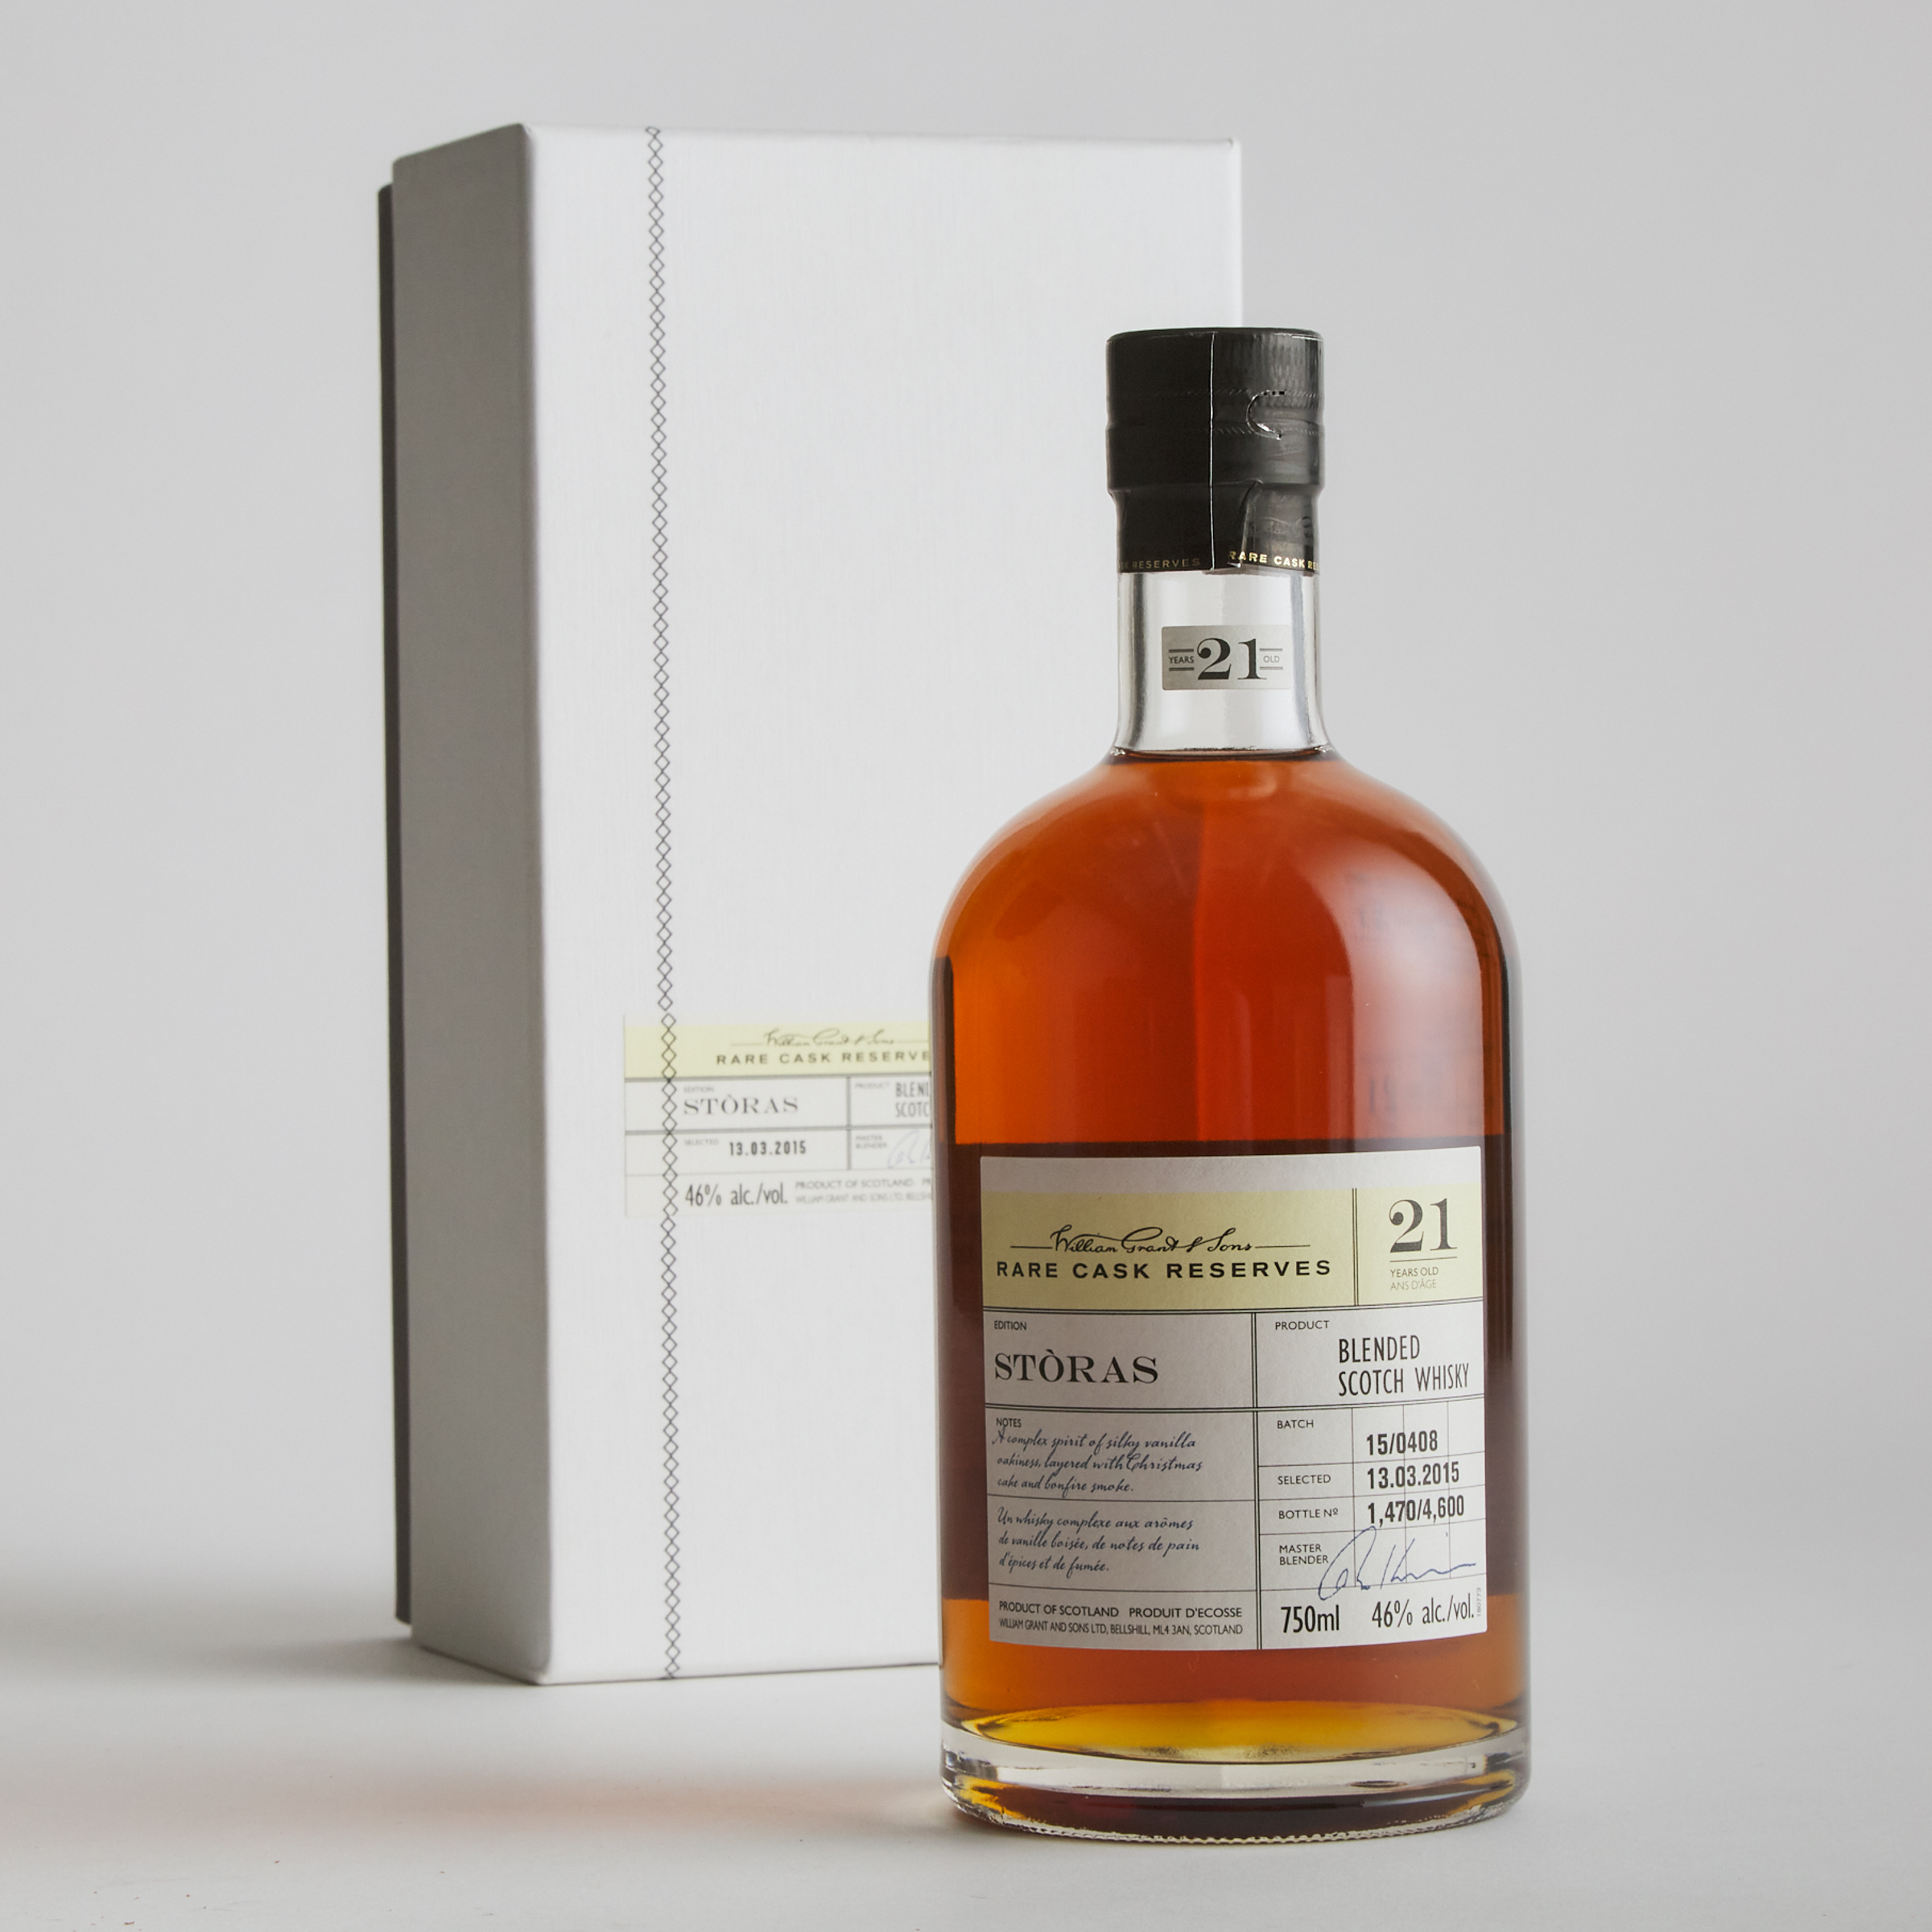 WILLIAM GRANT & SONS BLENDED SCOTCH WHISKY 21 YEARS (ONE 750 ML)